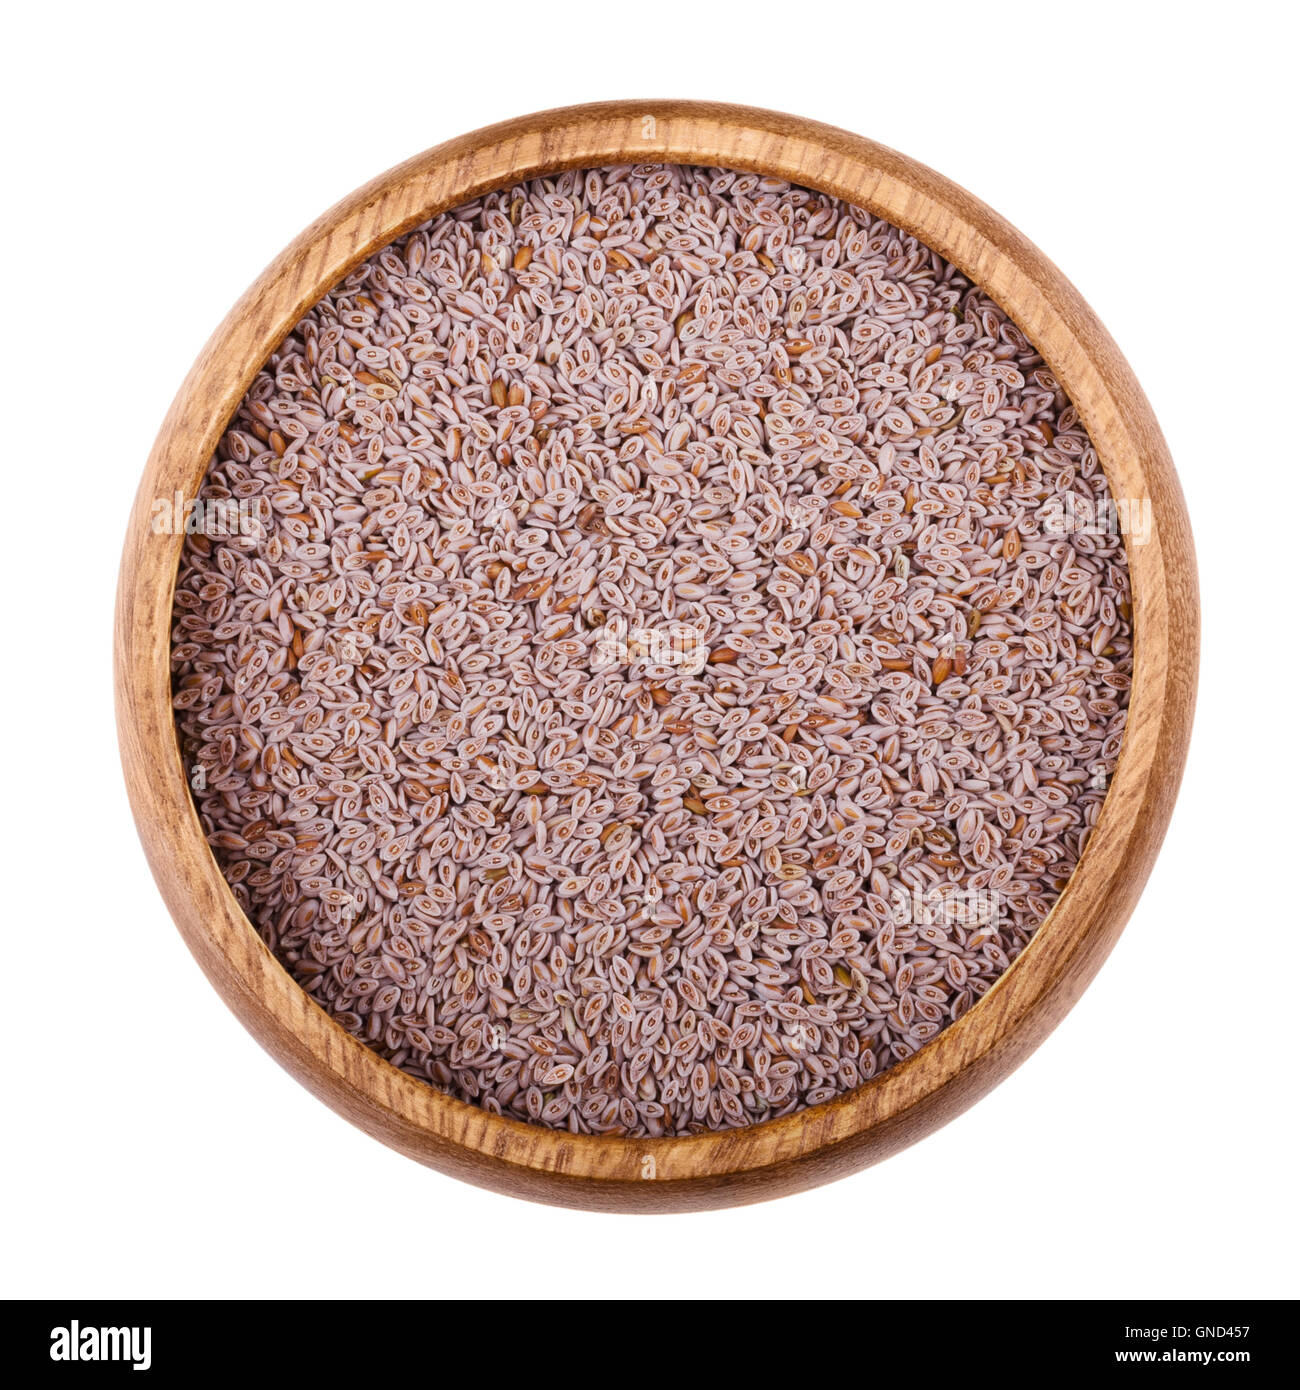 Psyllium seed husks in a wooden bowl on white background. Dried fruits, used in cooking  to produce an edible mucilage. Stock Photo